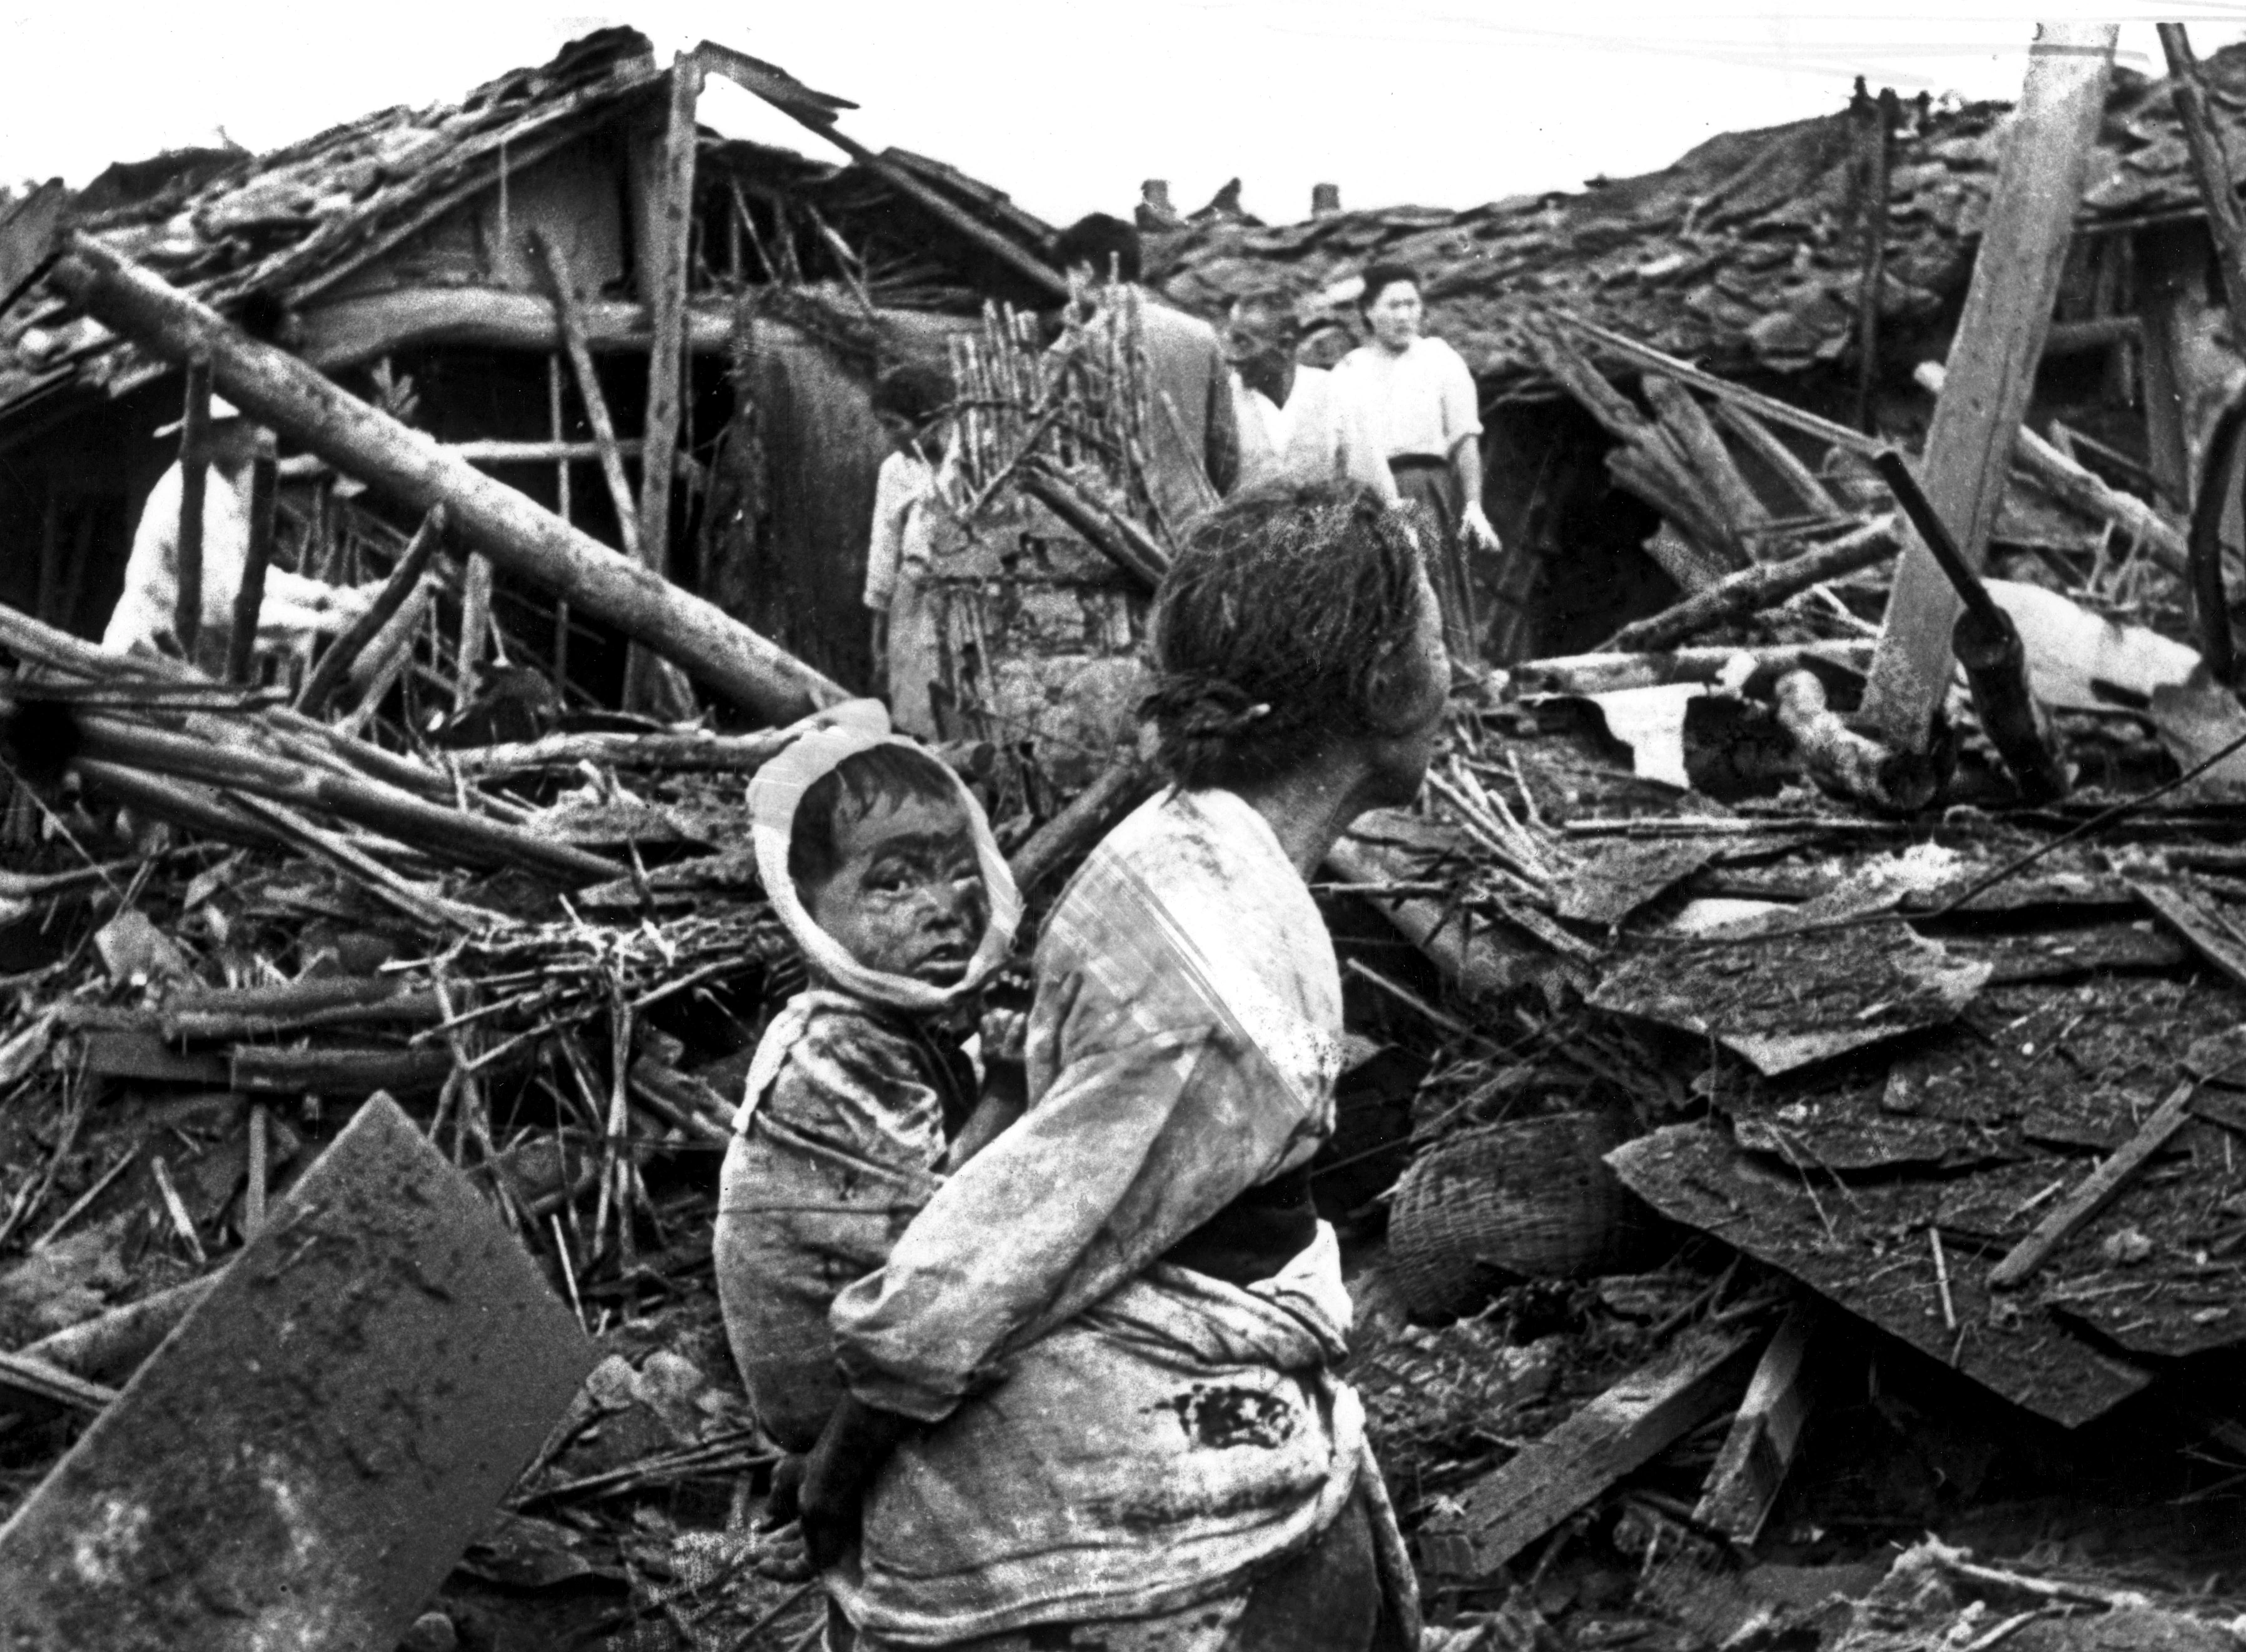 circa 1950: An elderly woman and her grandchild wander among the debris of their wrecked home in the aftermath of an air raid by U.S. planes over Pyongyang, the Communist capital of North Korea. (Photo by Keystone/Getty Images)